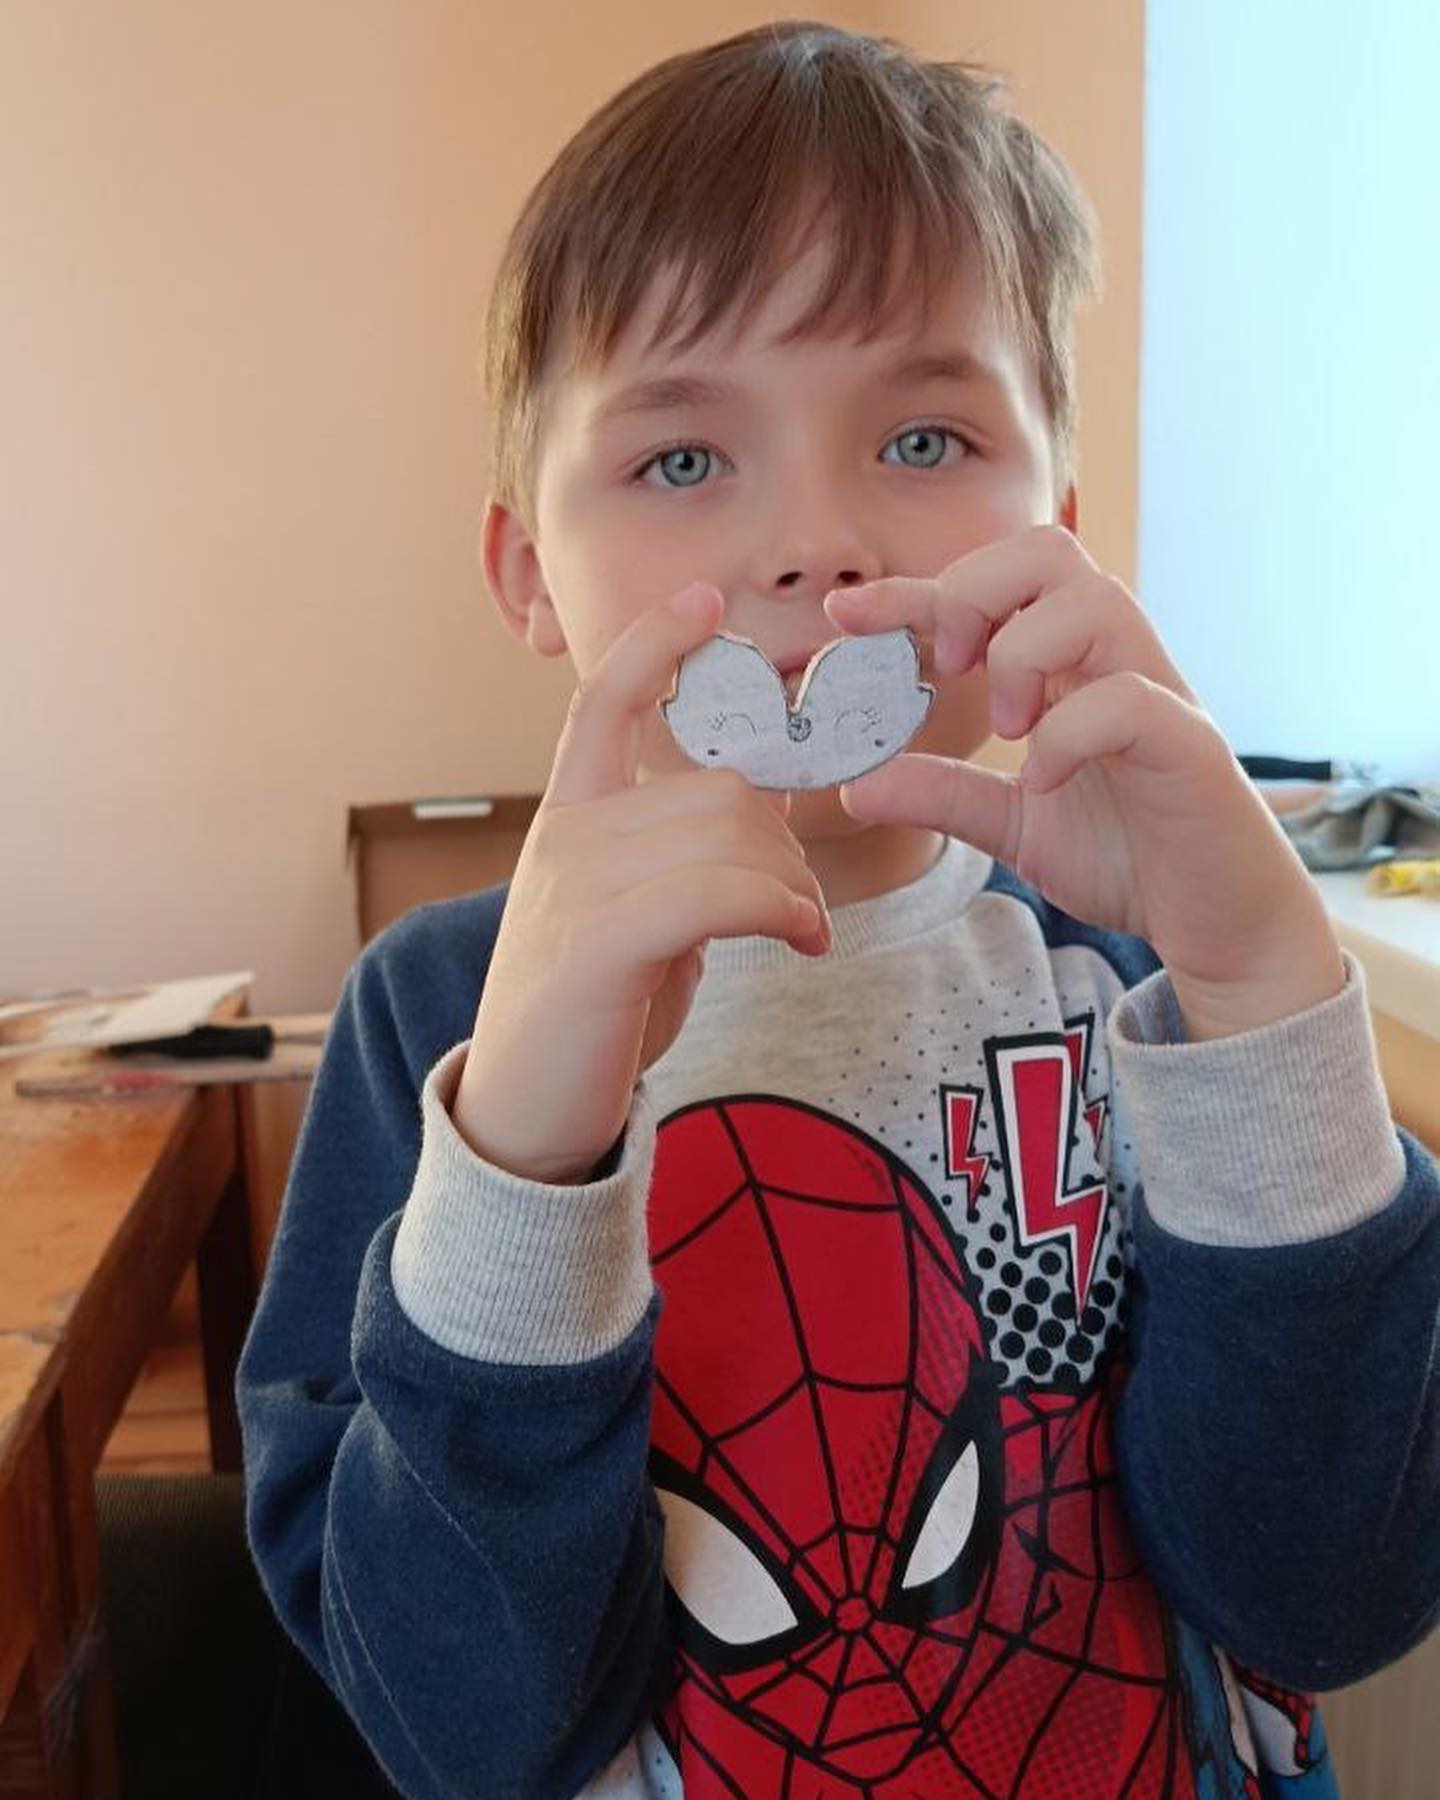 A young boy holding up a heart shaped piece of paper.